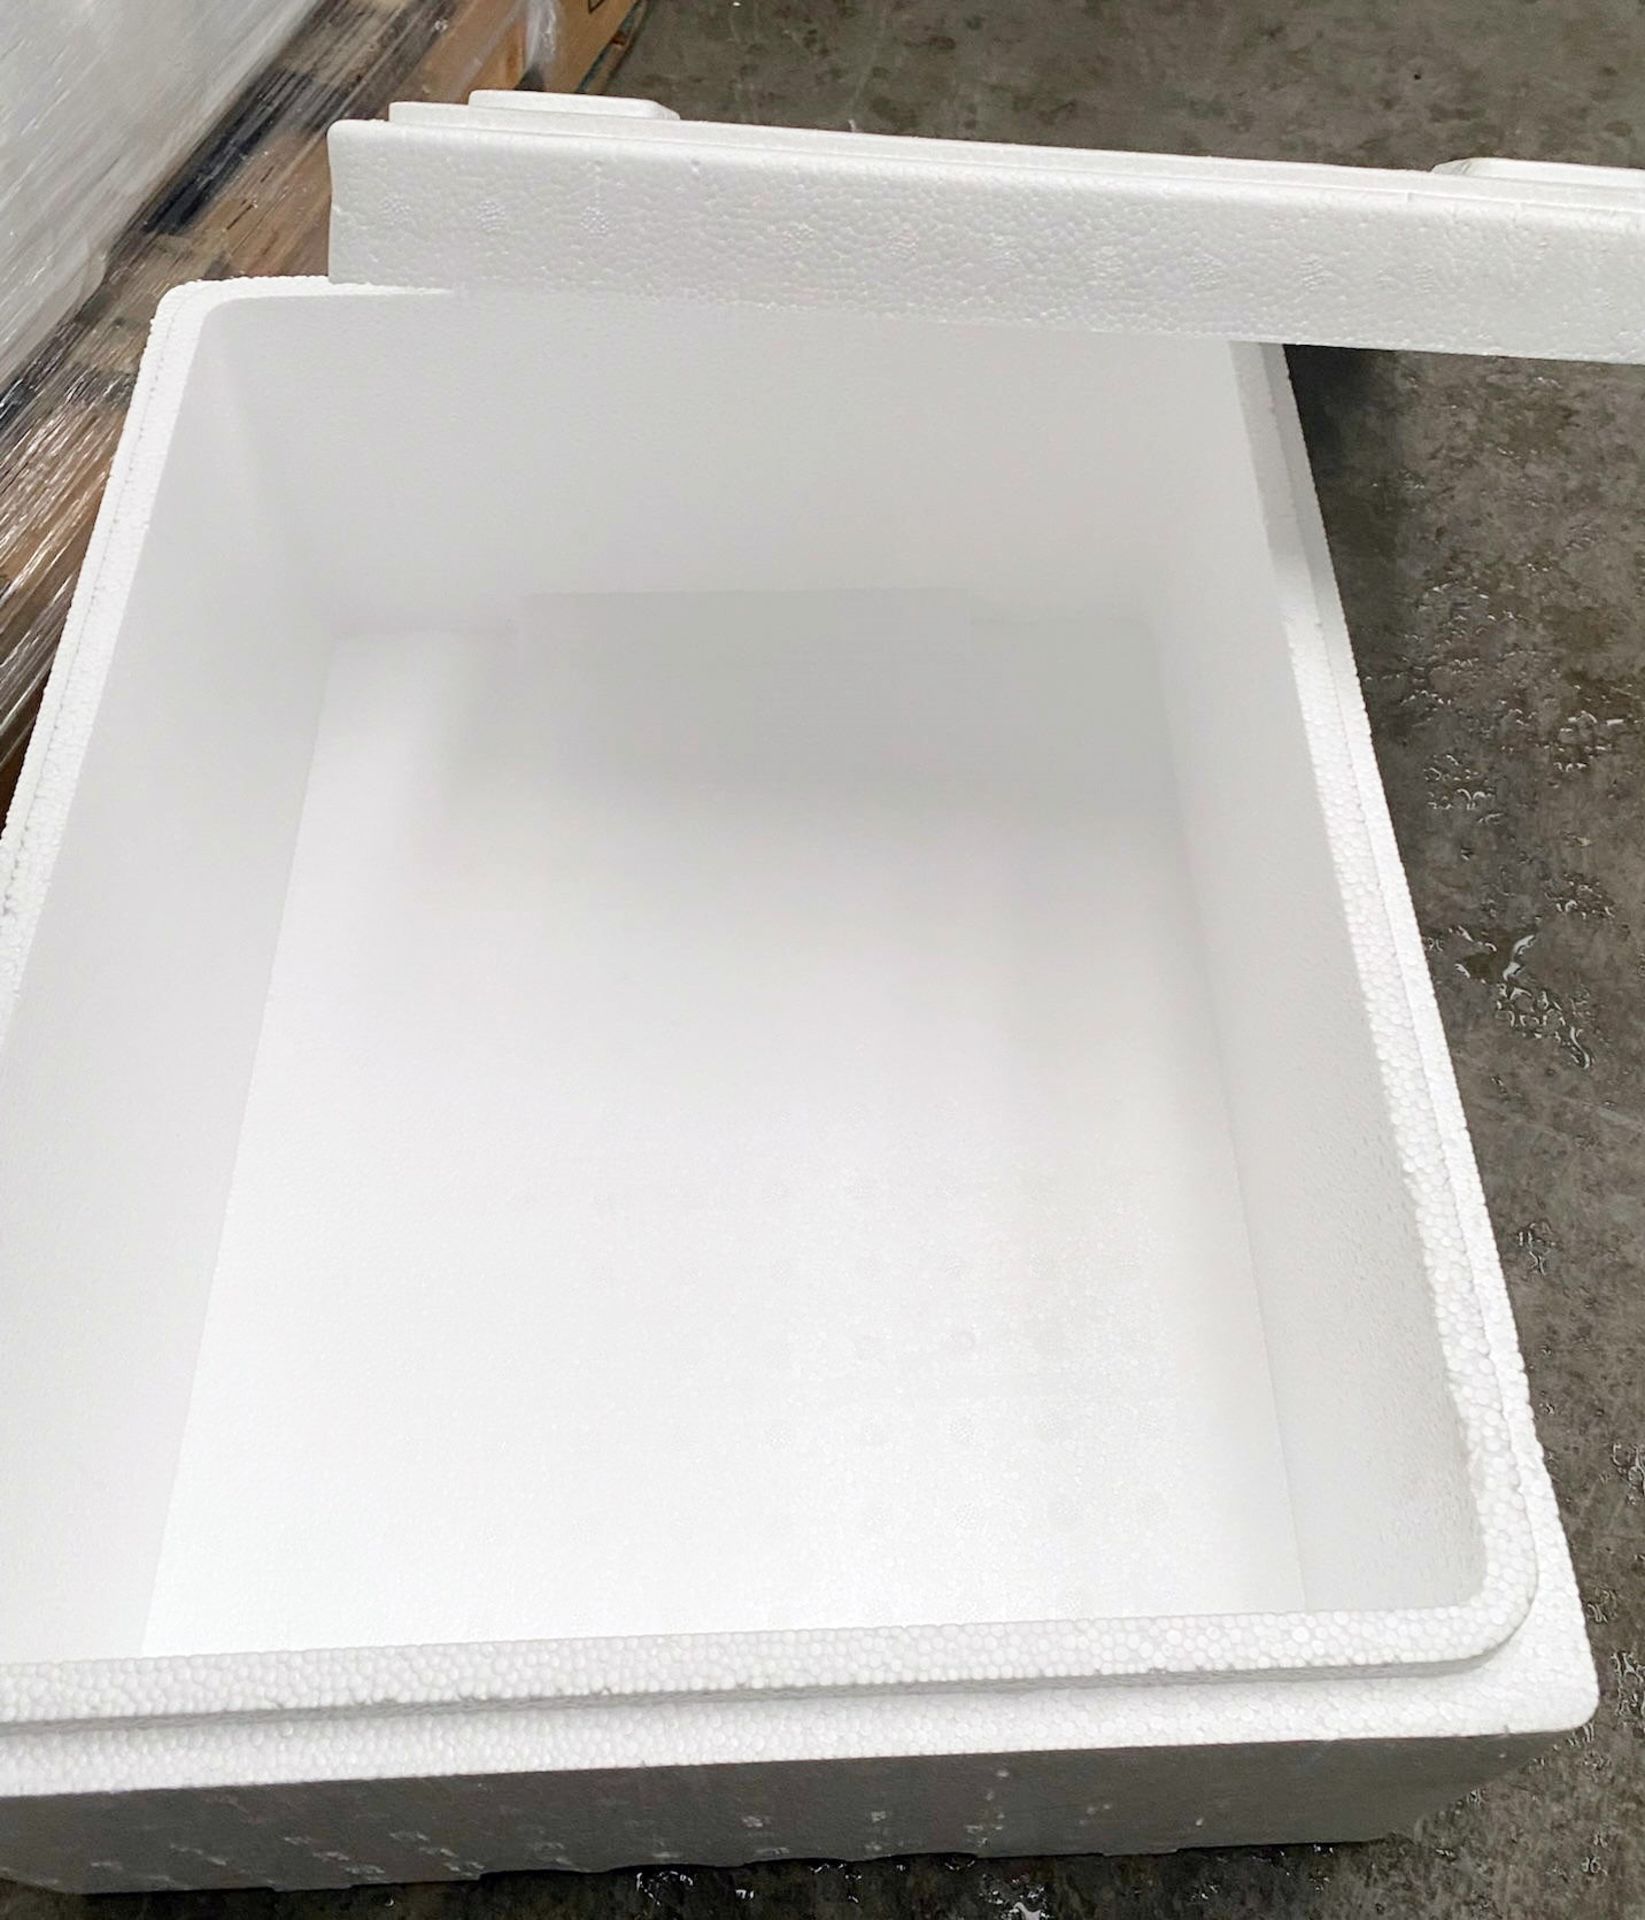 1 x Pallet of Polystyrene Insulated Food Delivery Boxes With Lids - Image 2 of 3